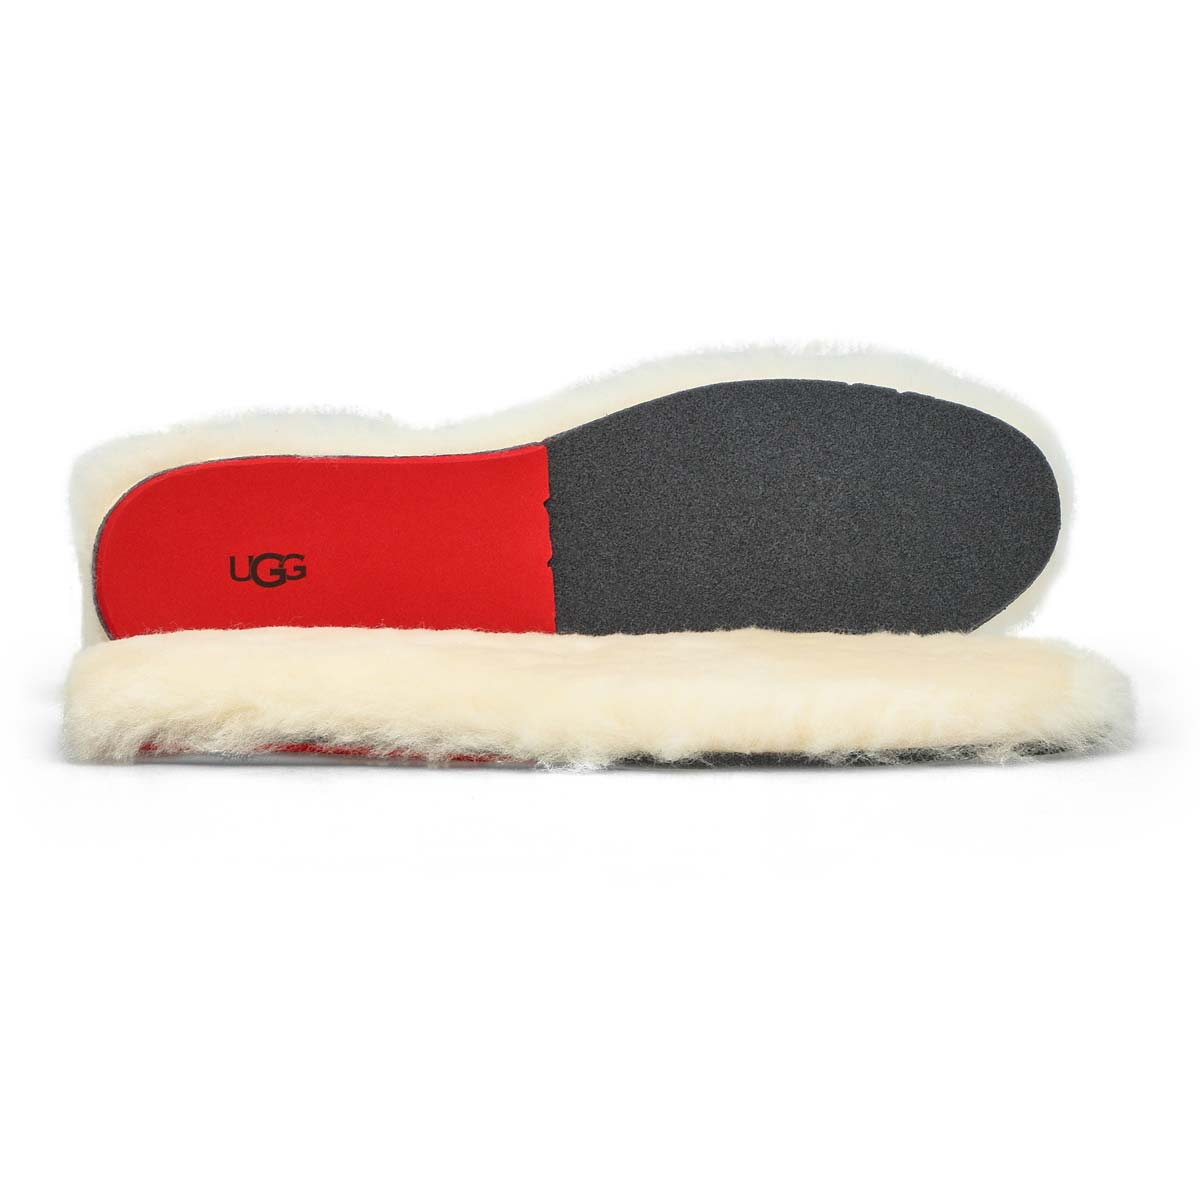 Ugg ugg insole replacements, Shoes + FREE SHIPPING | Zappos.com